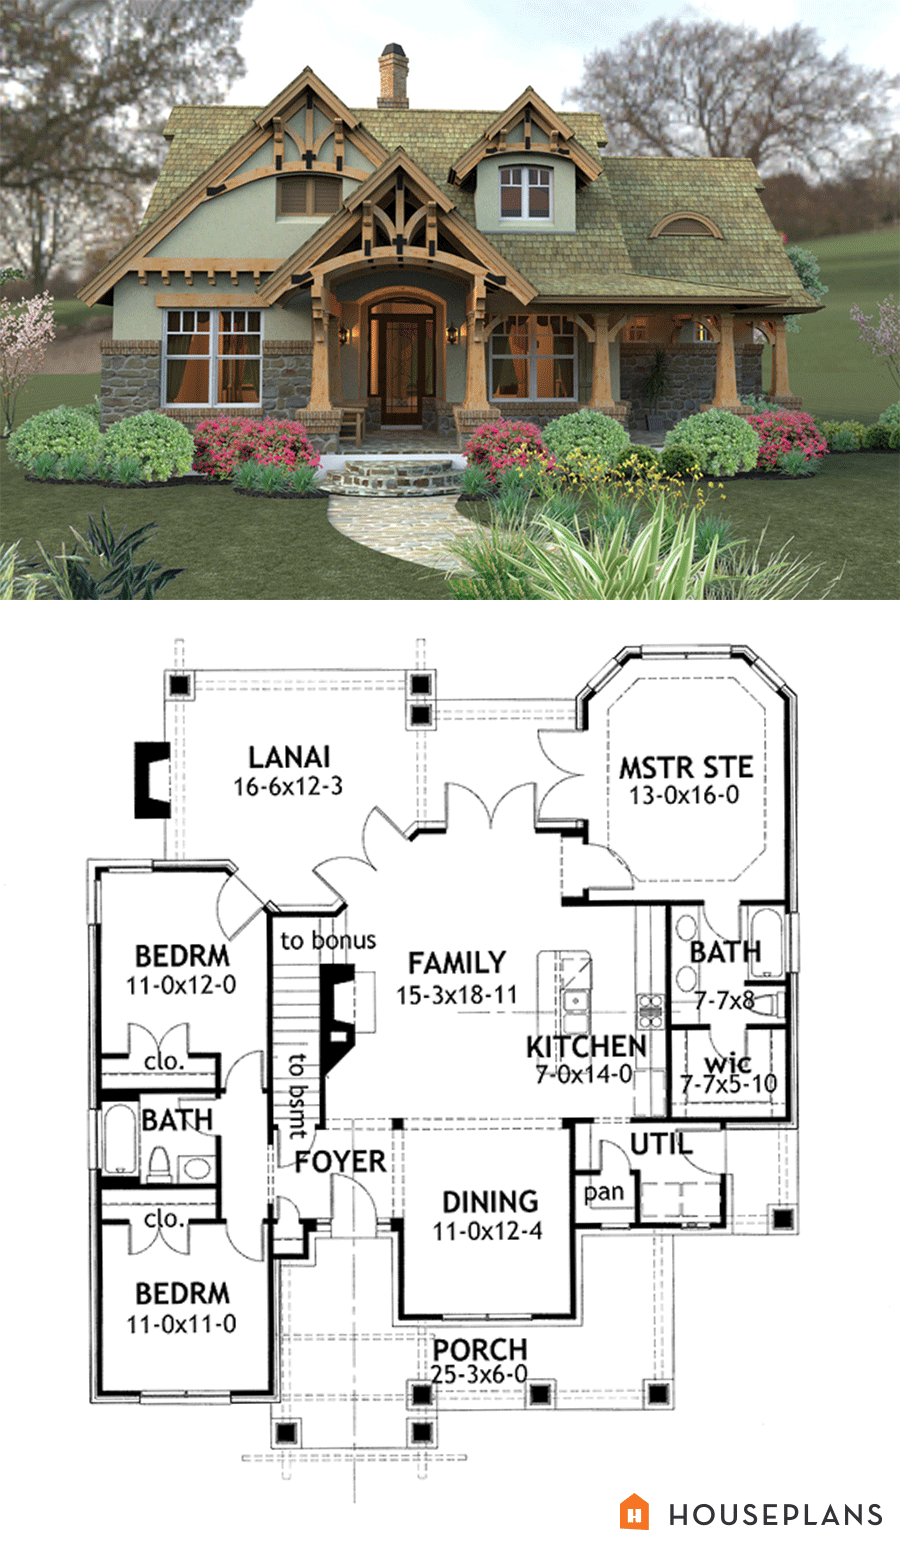 craftsman mountain house plan and elevation 1400sft houseplans # 120-174